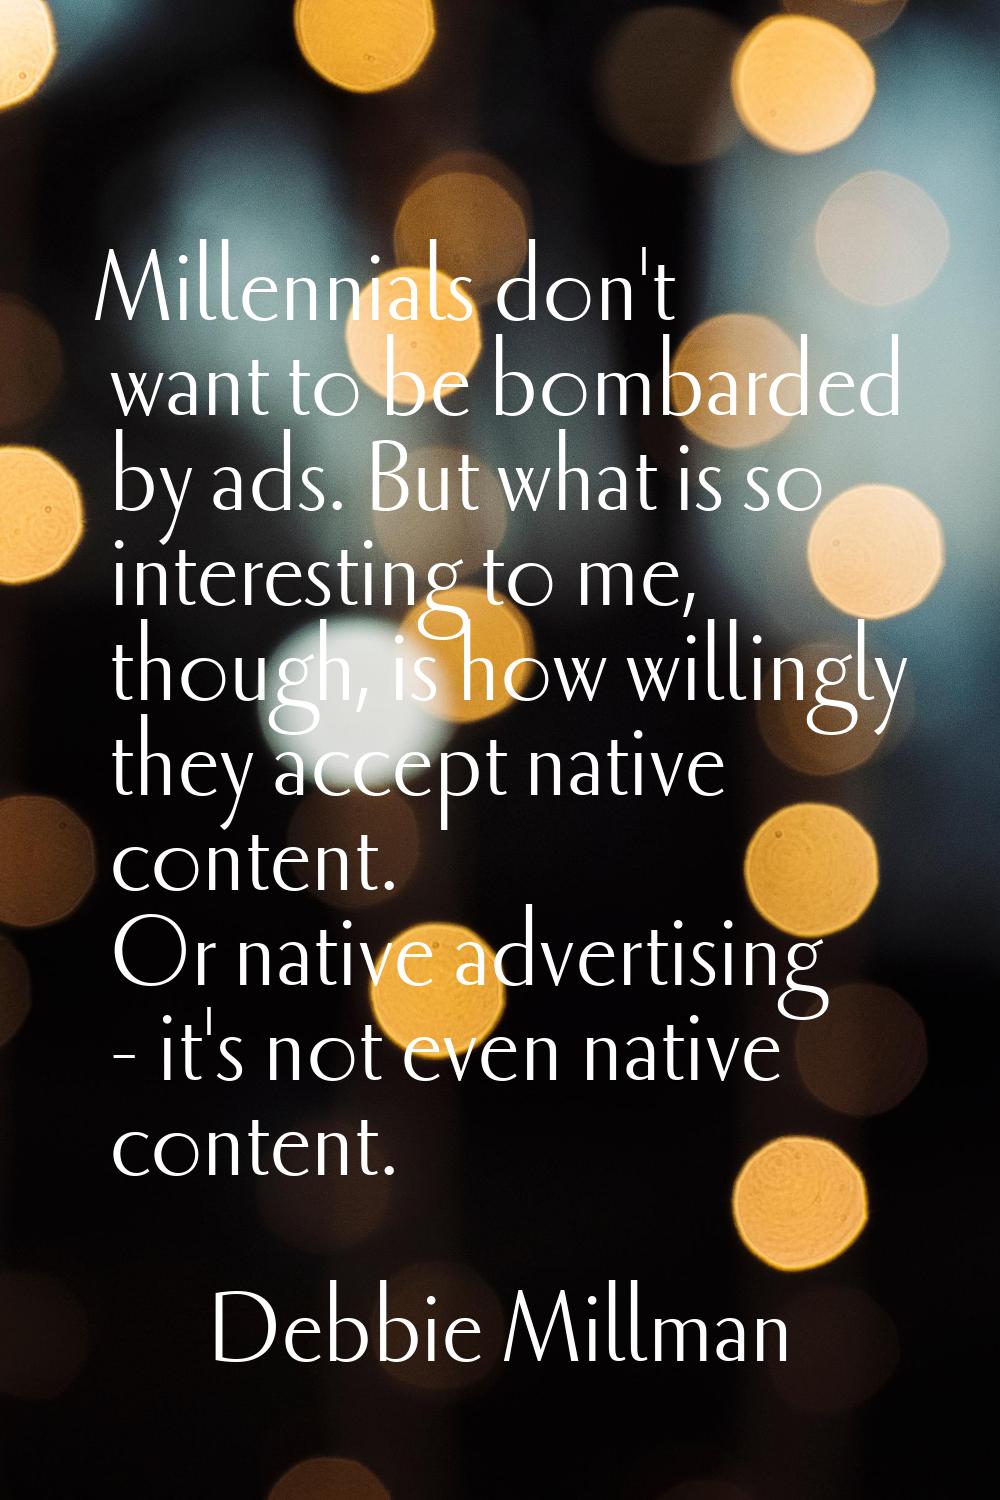 Millennials don't want to be bombarded by ads. But what is so interesting to me, though, is how wil